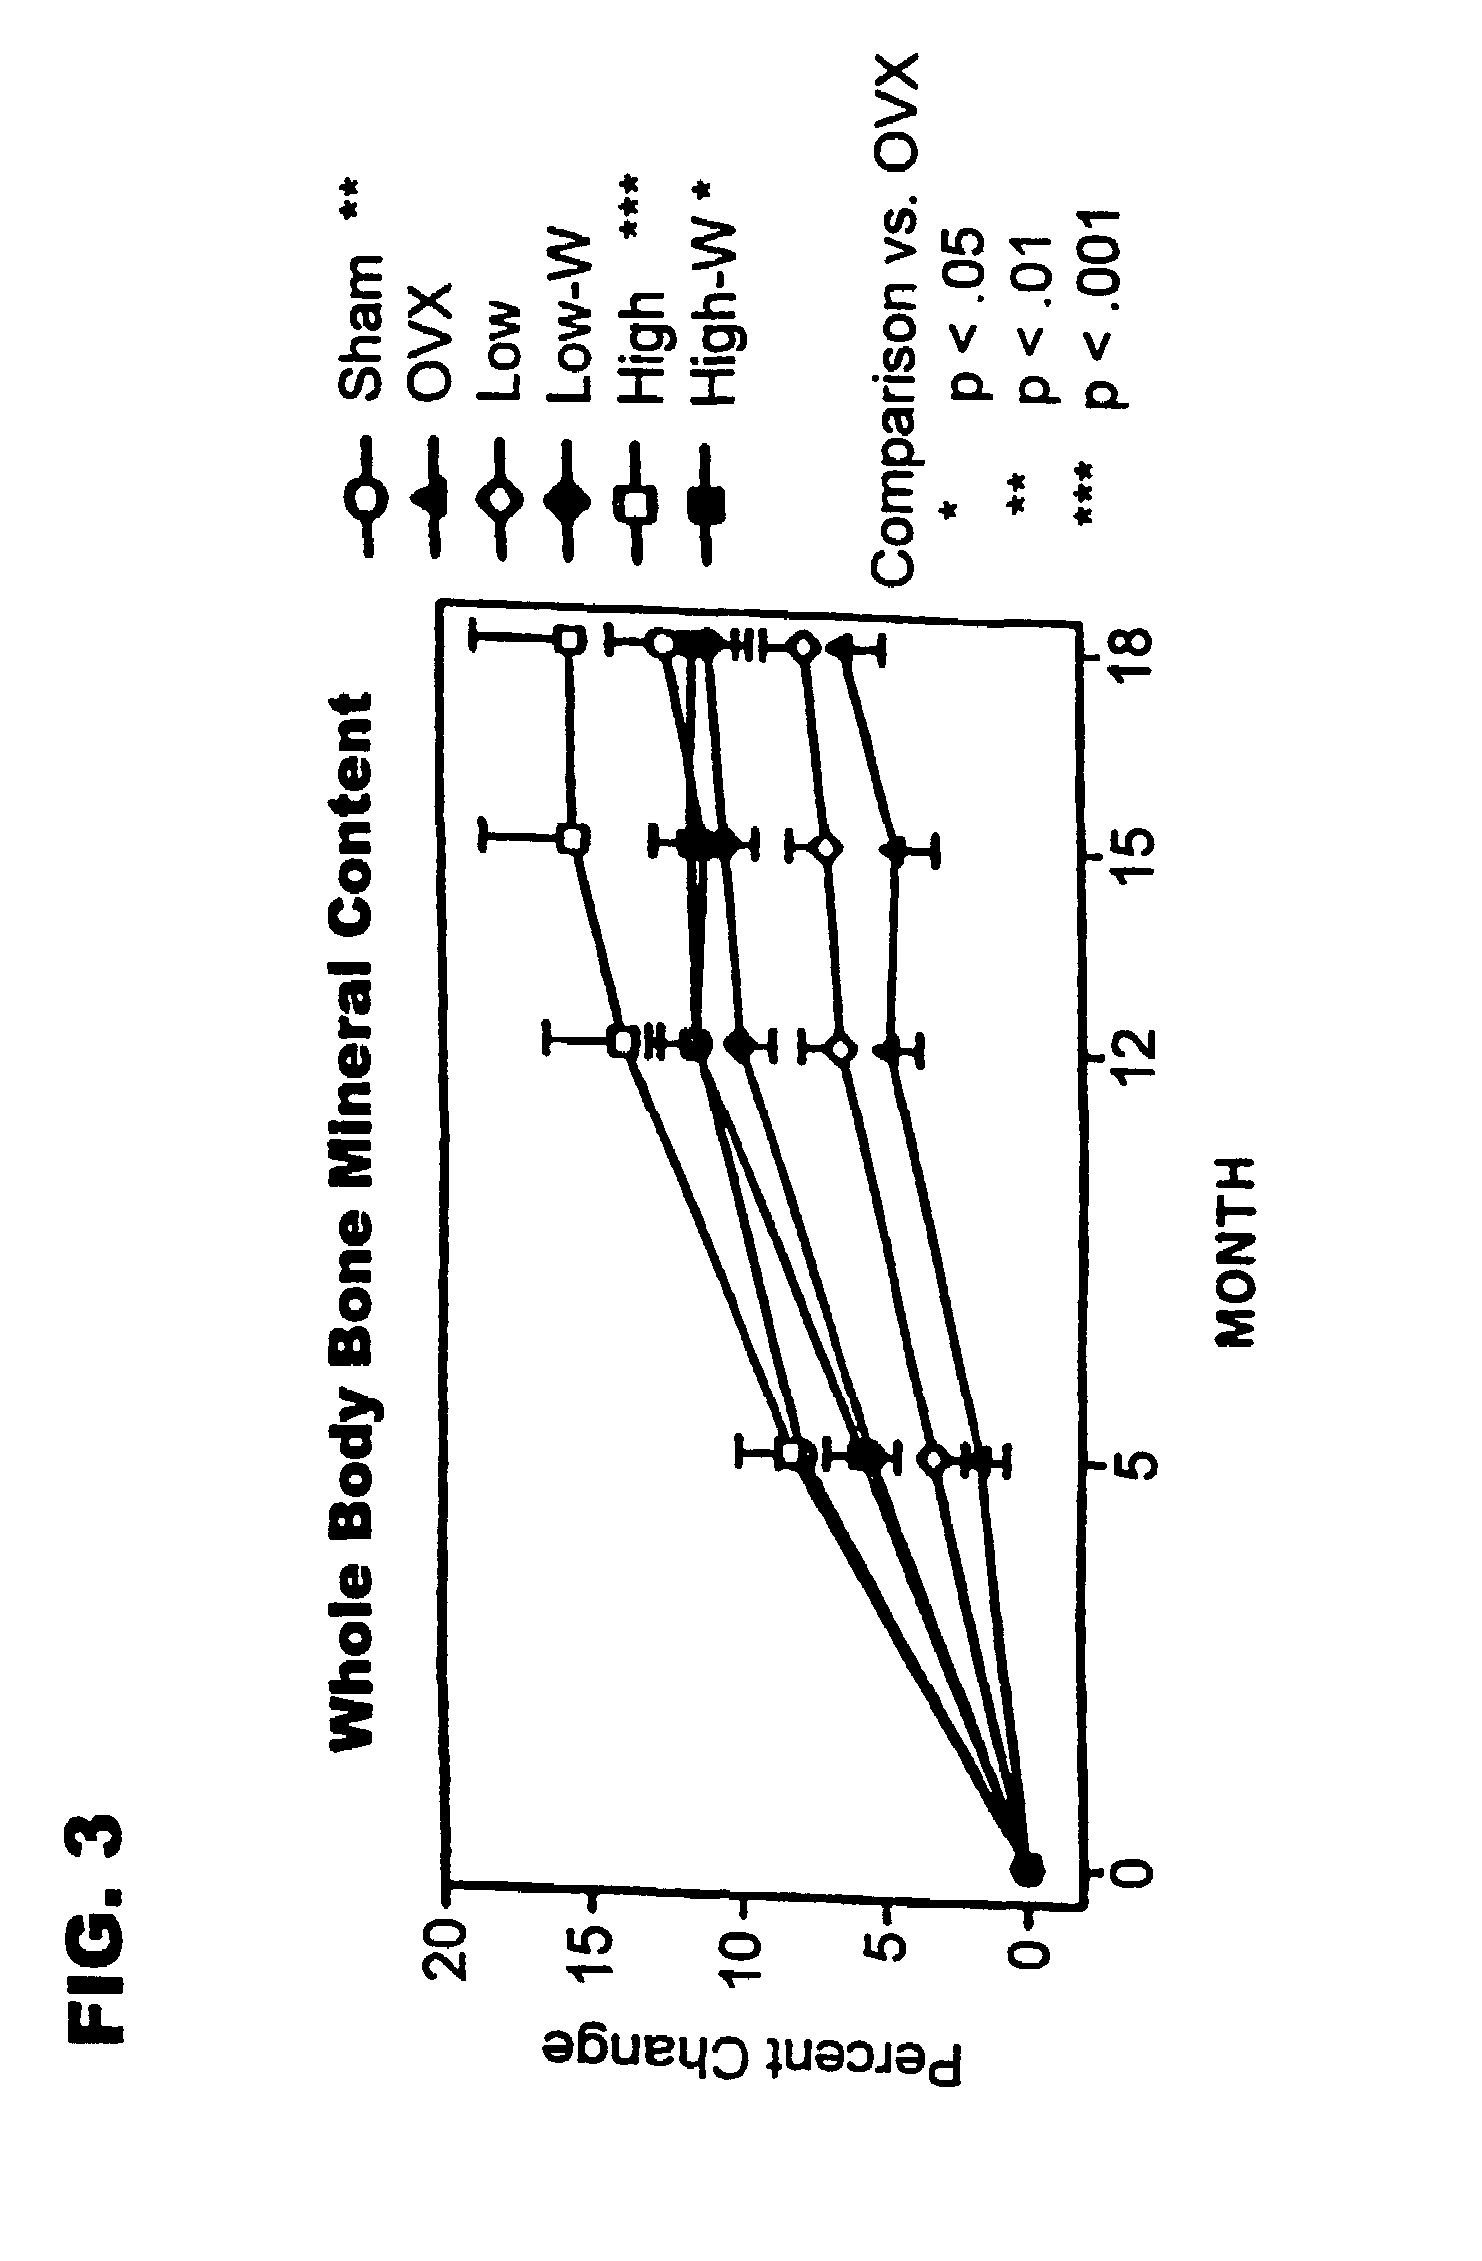 Method of increasing bone toughness and stiffness and reducing fractures